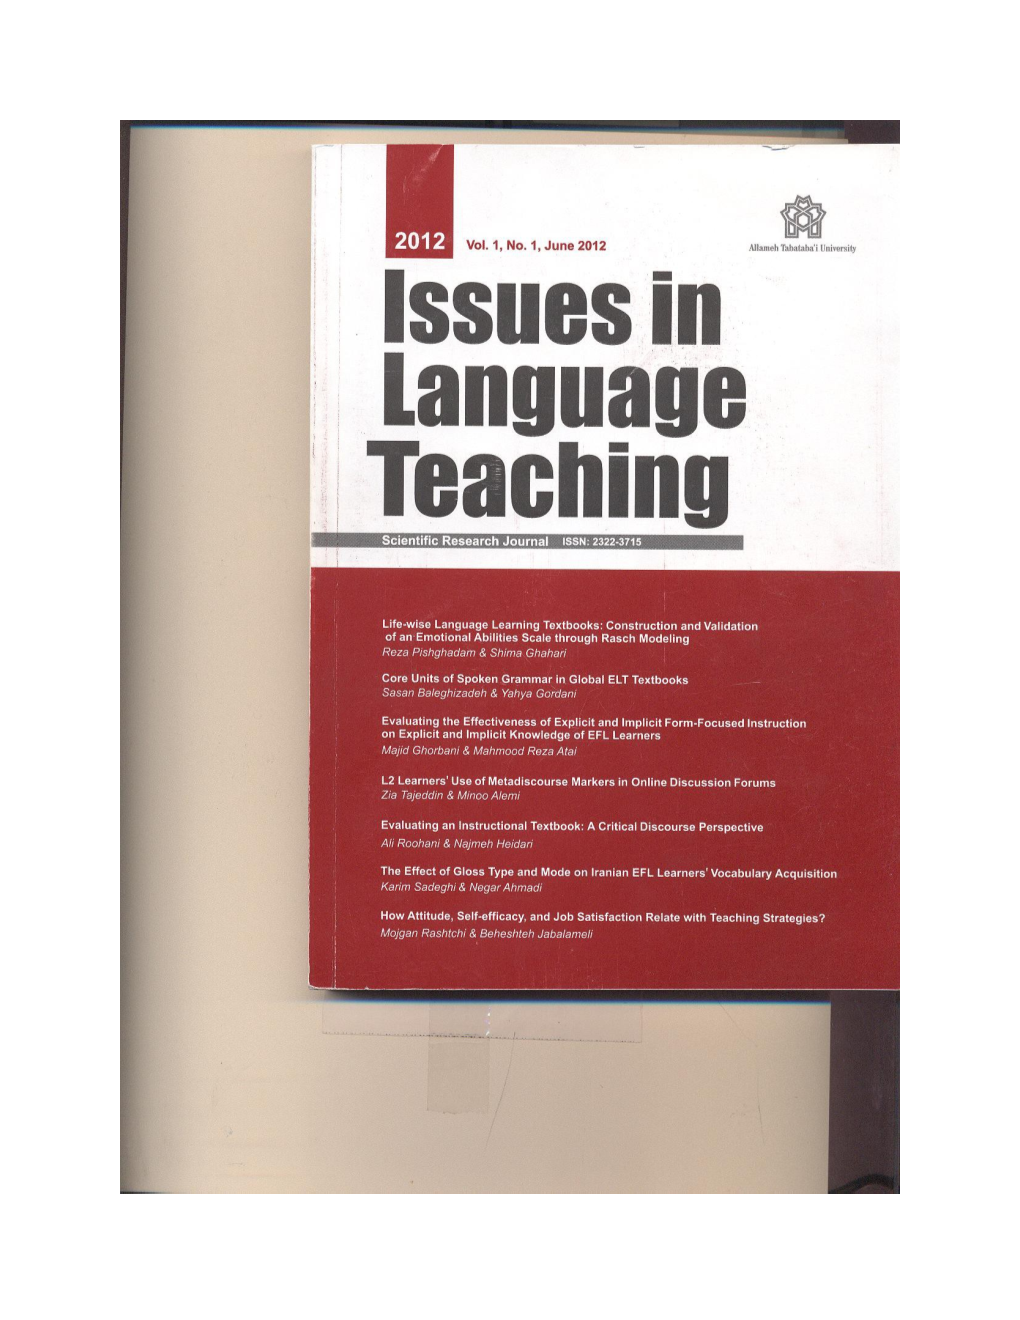 Life-Wise Language Learning Textbooks: Construction and Validation of an Emotional Abilities